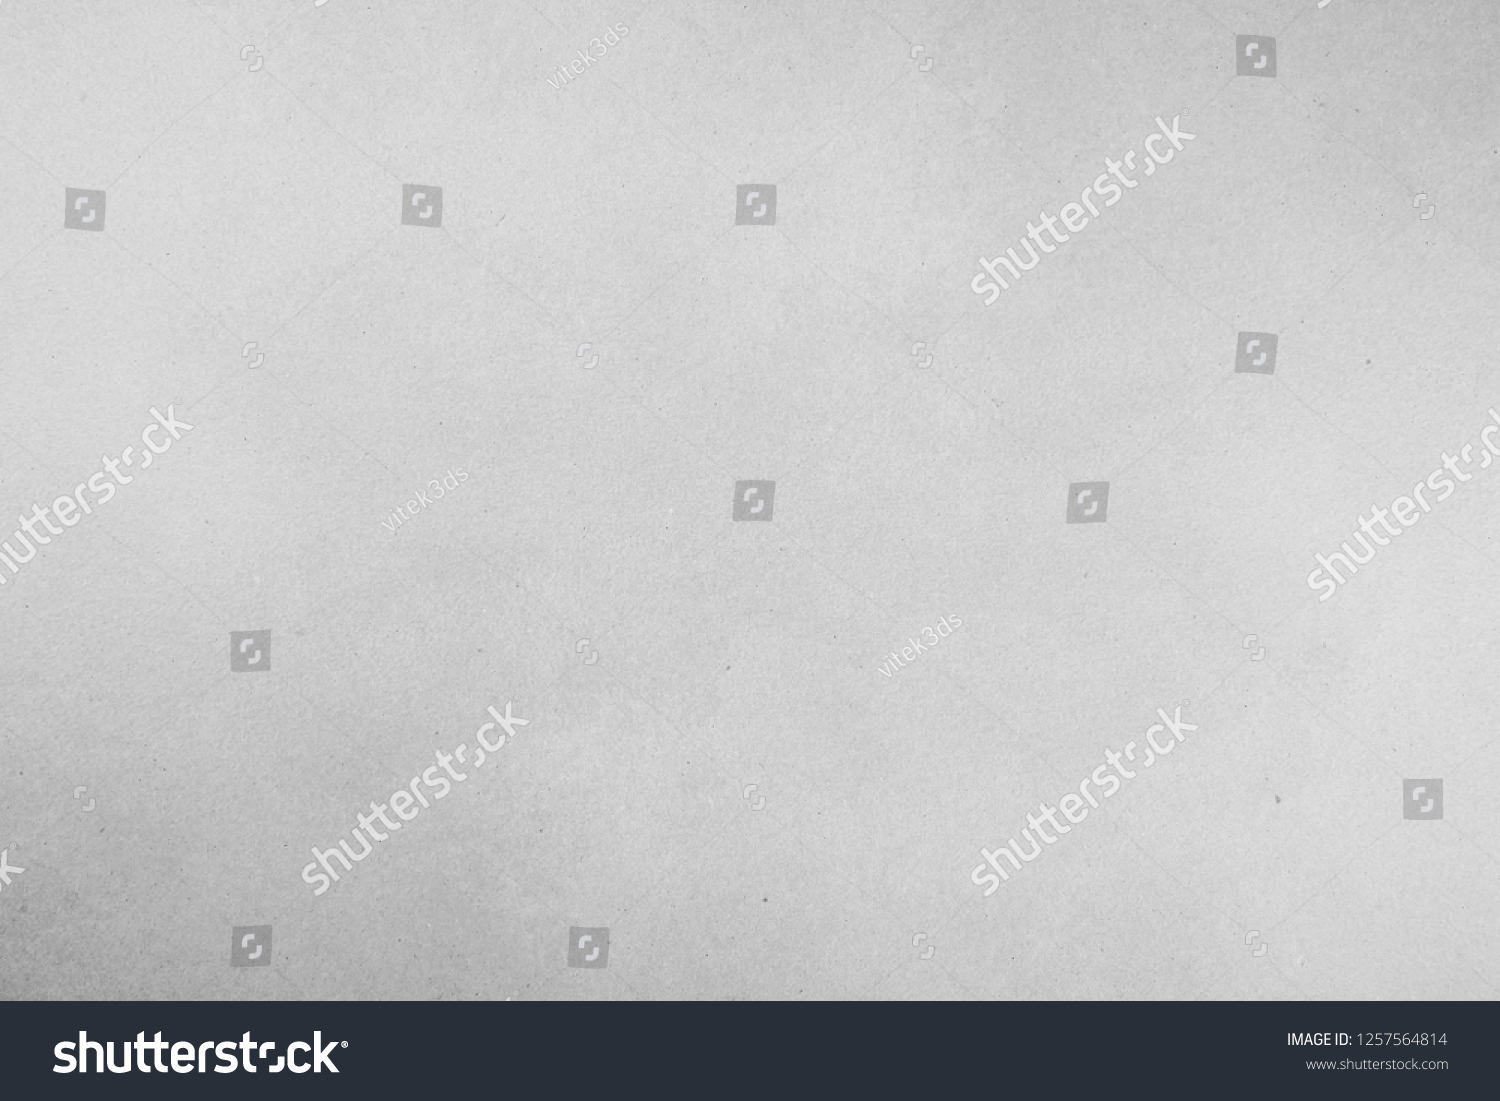 5,036,491 Grey surface Images, Stock Photos & Vectors | Shutterstock